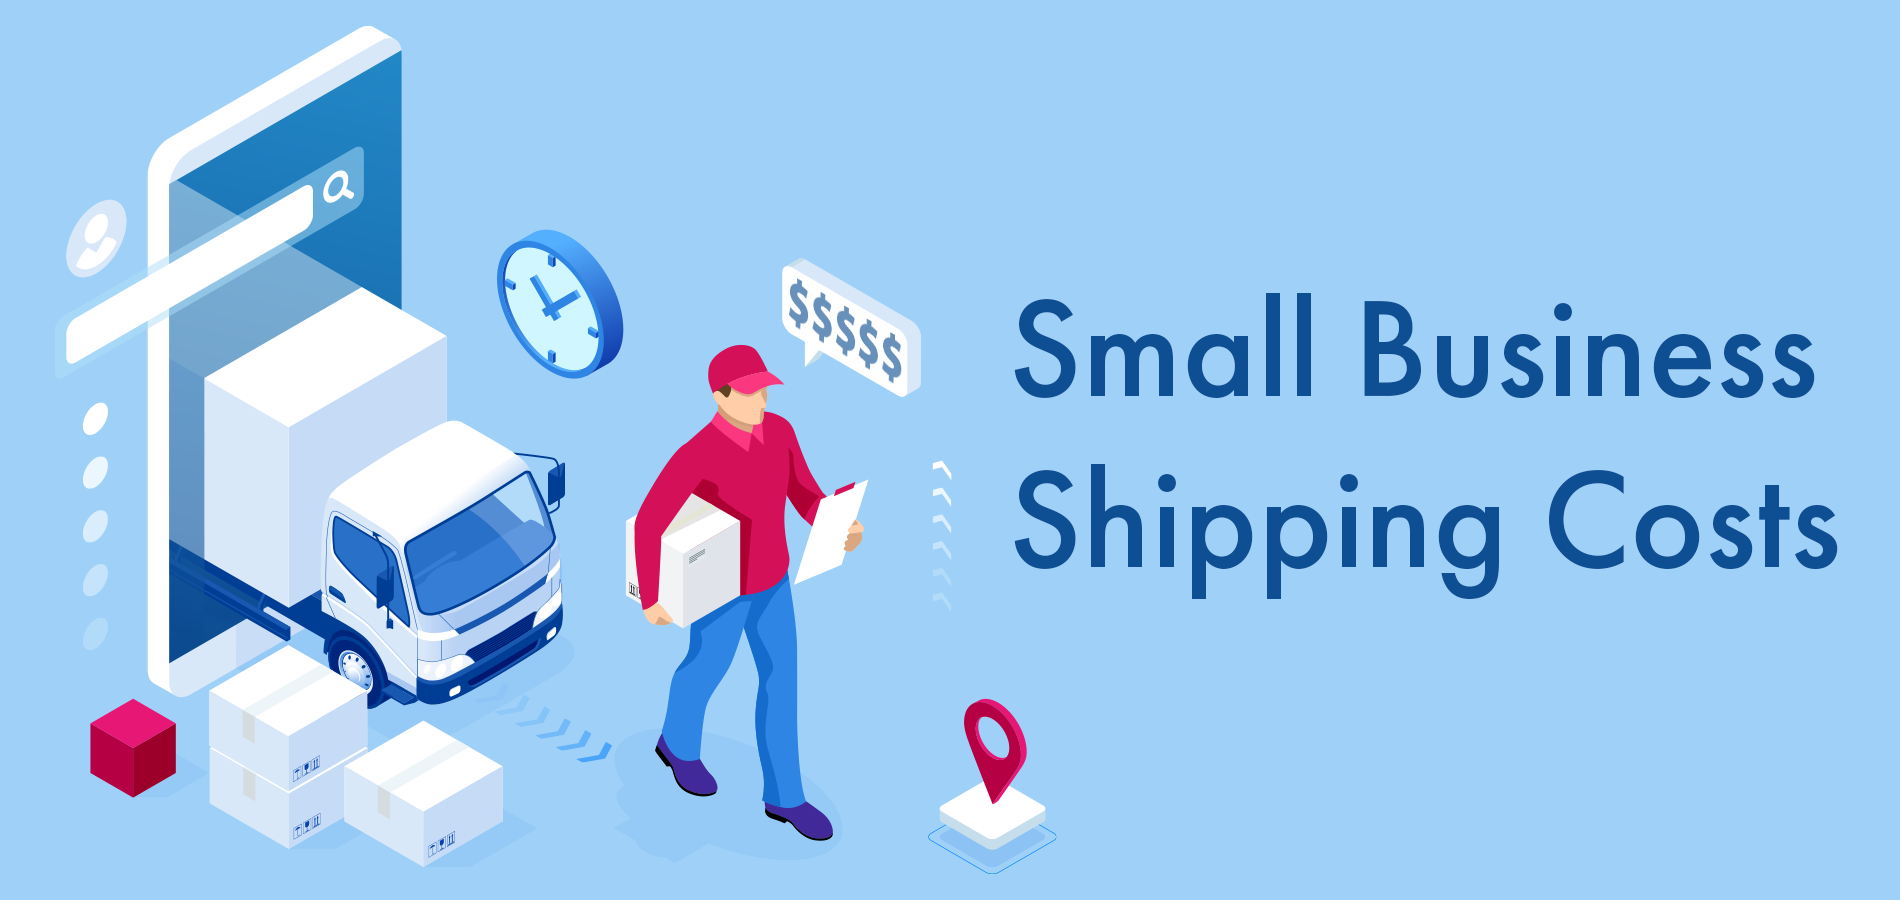 How much are shipping costs for a small business in Canada?